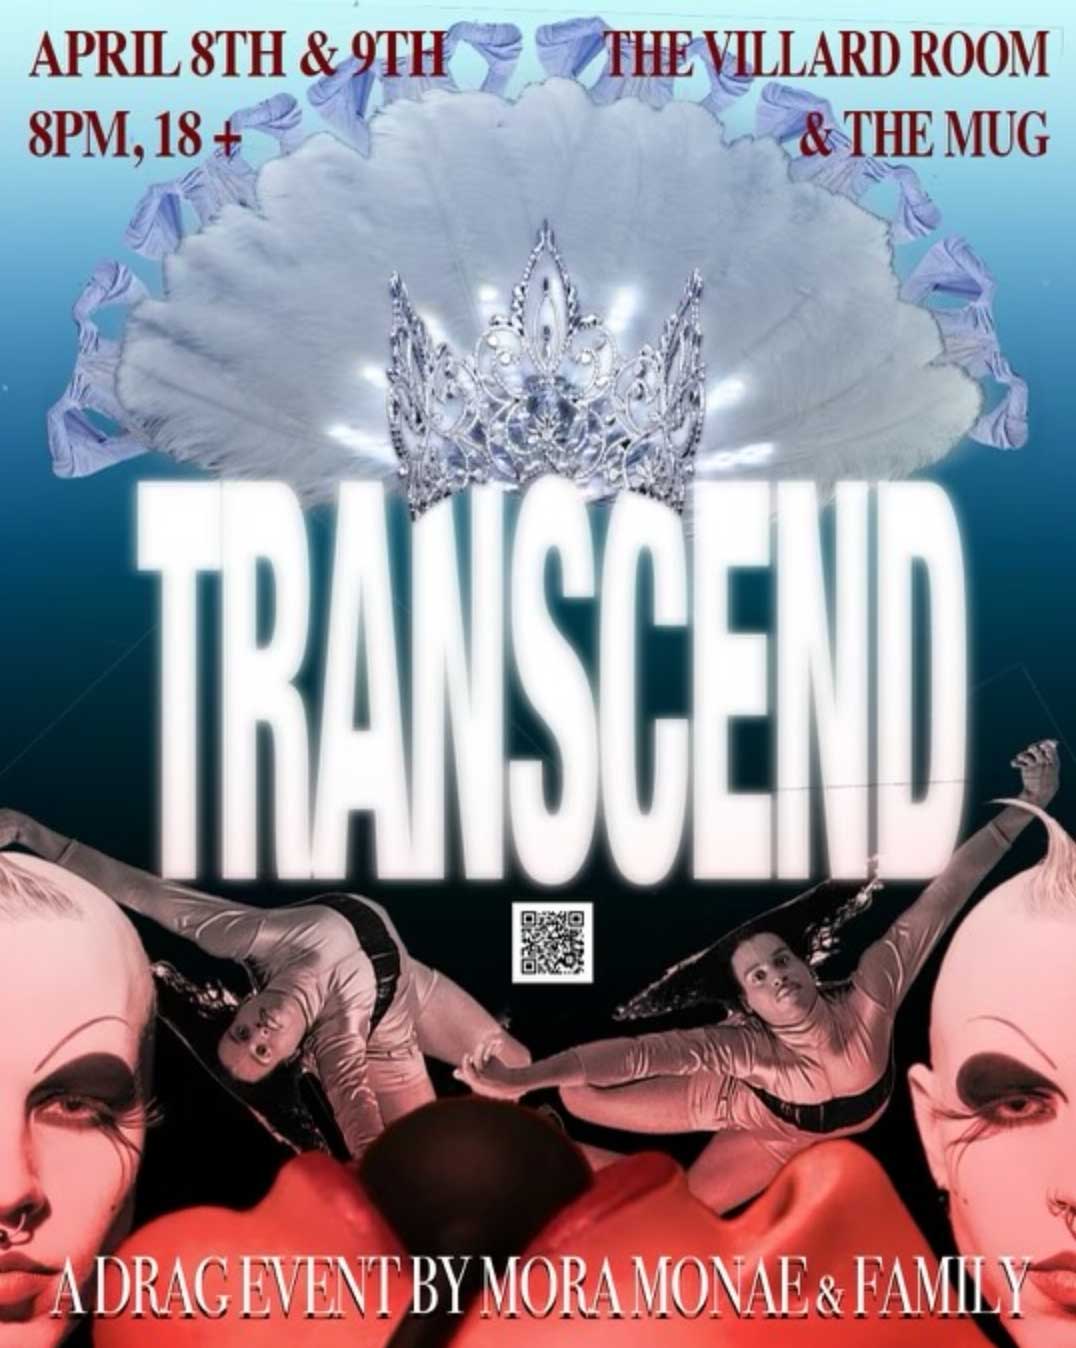 A poster featuring stylized photos of people wearing makeup and eye shadow. The text reads “Transcend: A Drag Event by Mora Monae and Family. April 8th and 9th, at 8 p.m.; 18+; The Villard Room and The Mug”.